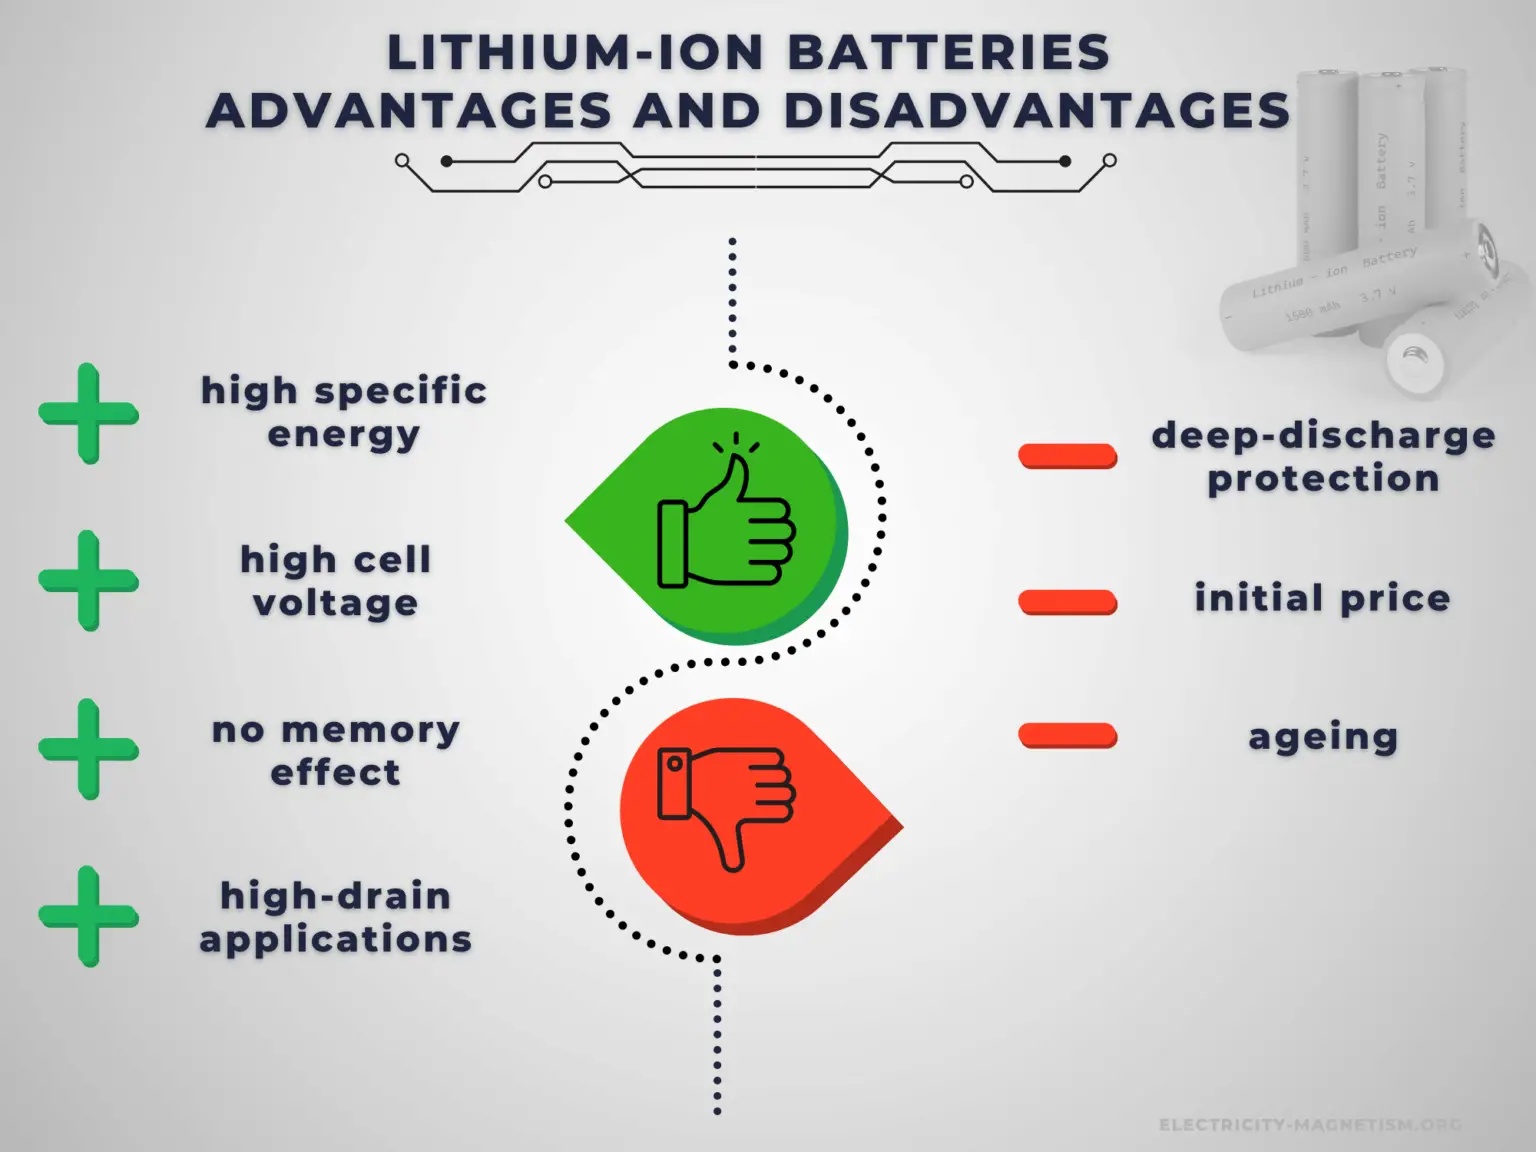 Whats the Advantages and Disadvantages of Lithium-ion Batteries